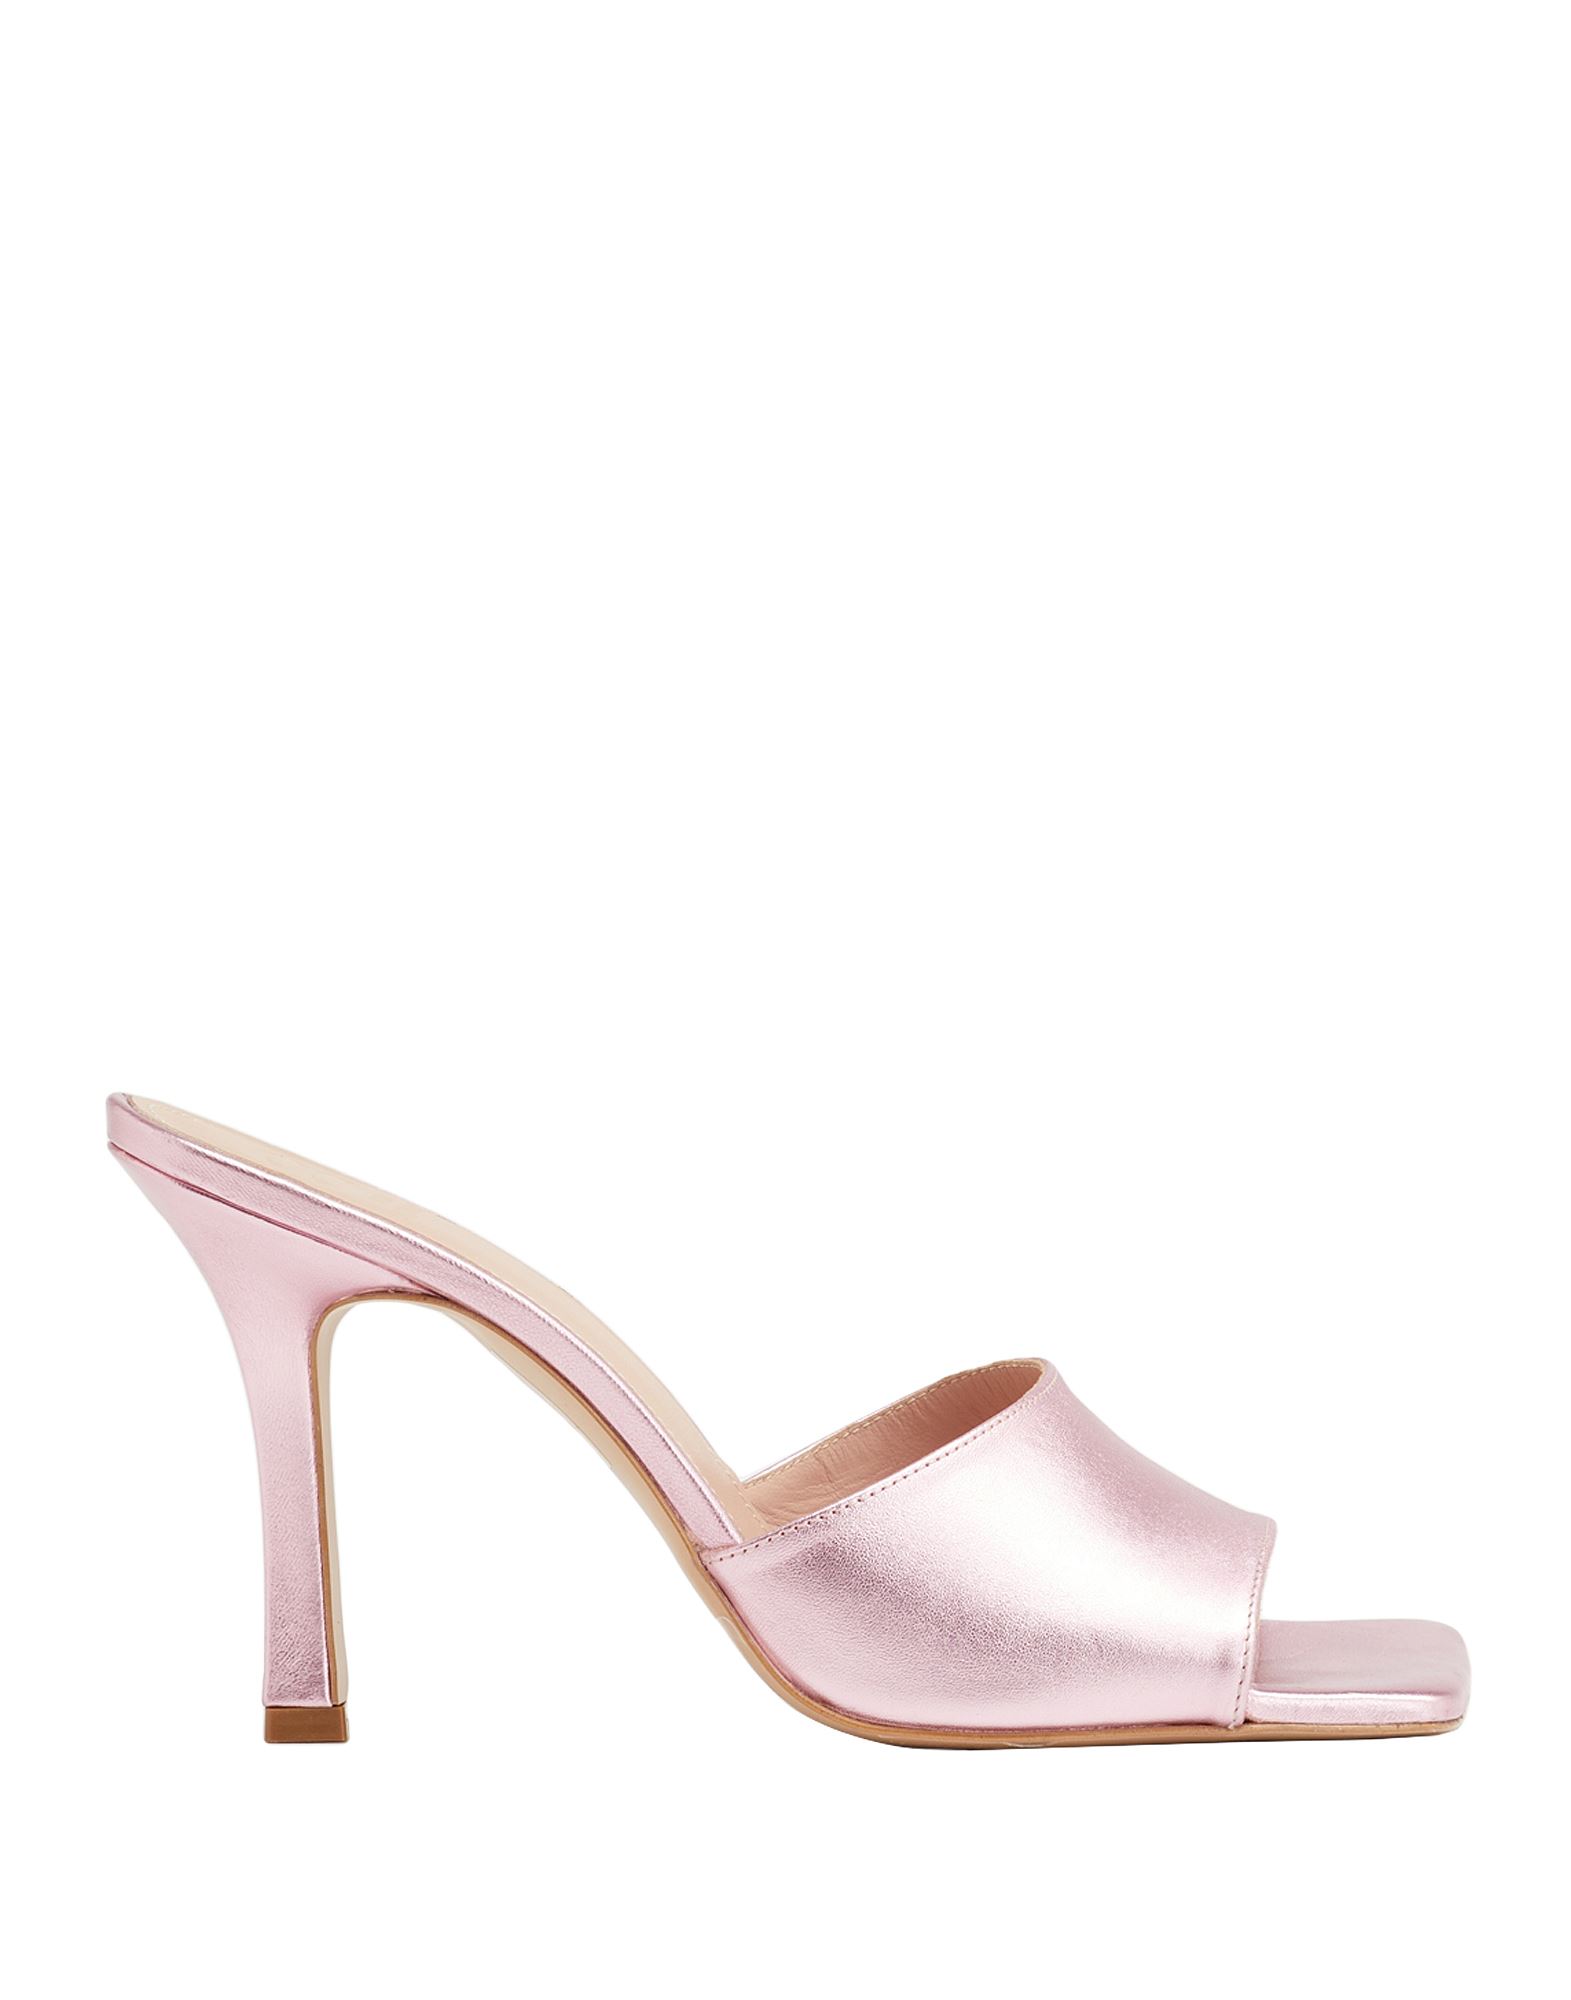 8 By Yoox Sandals In Rose Gold